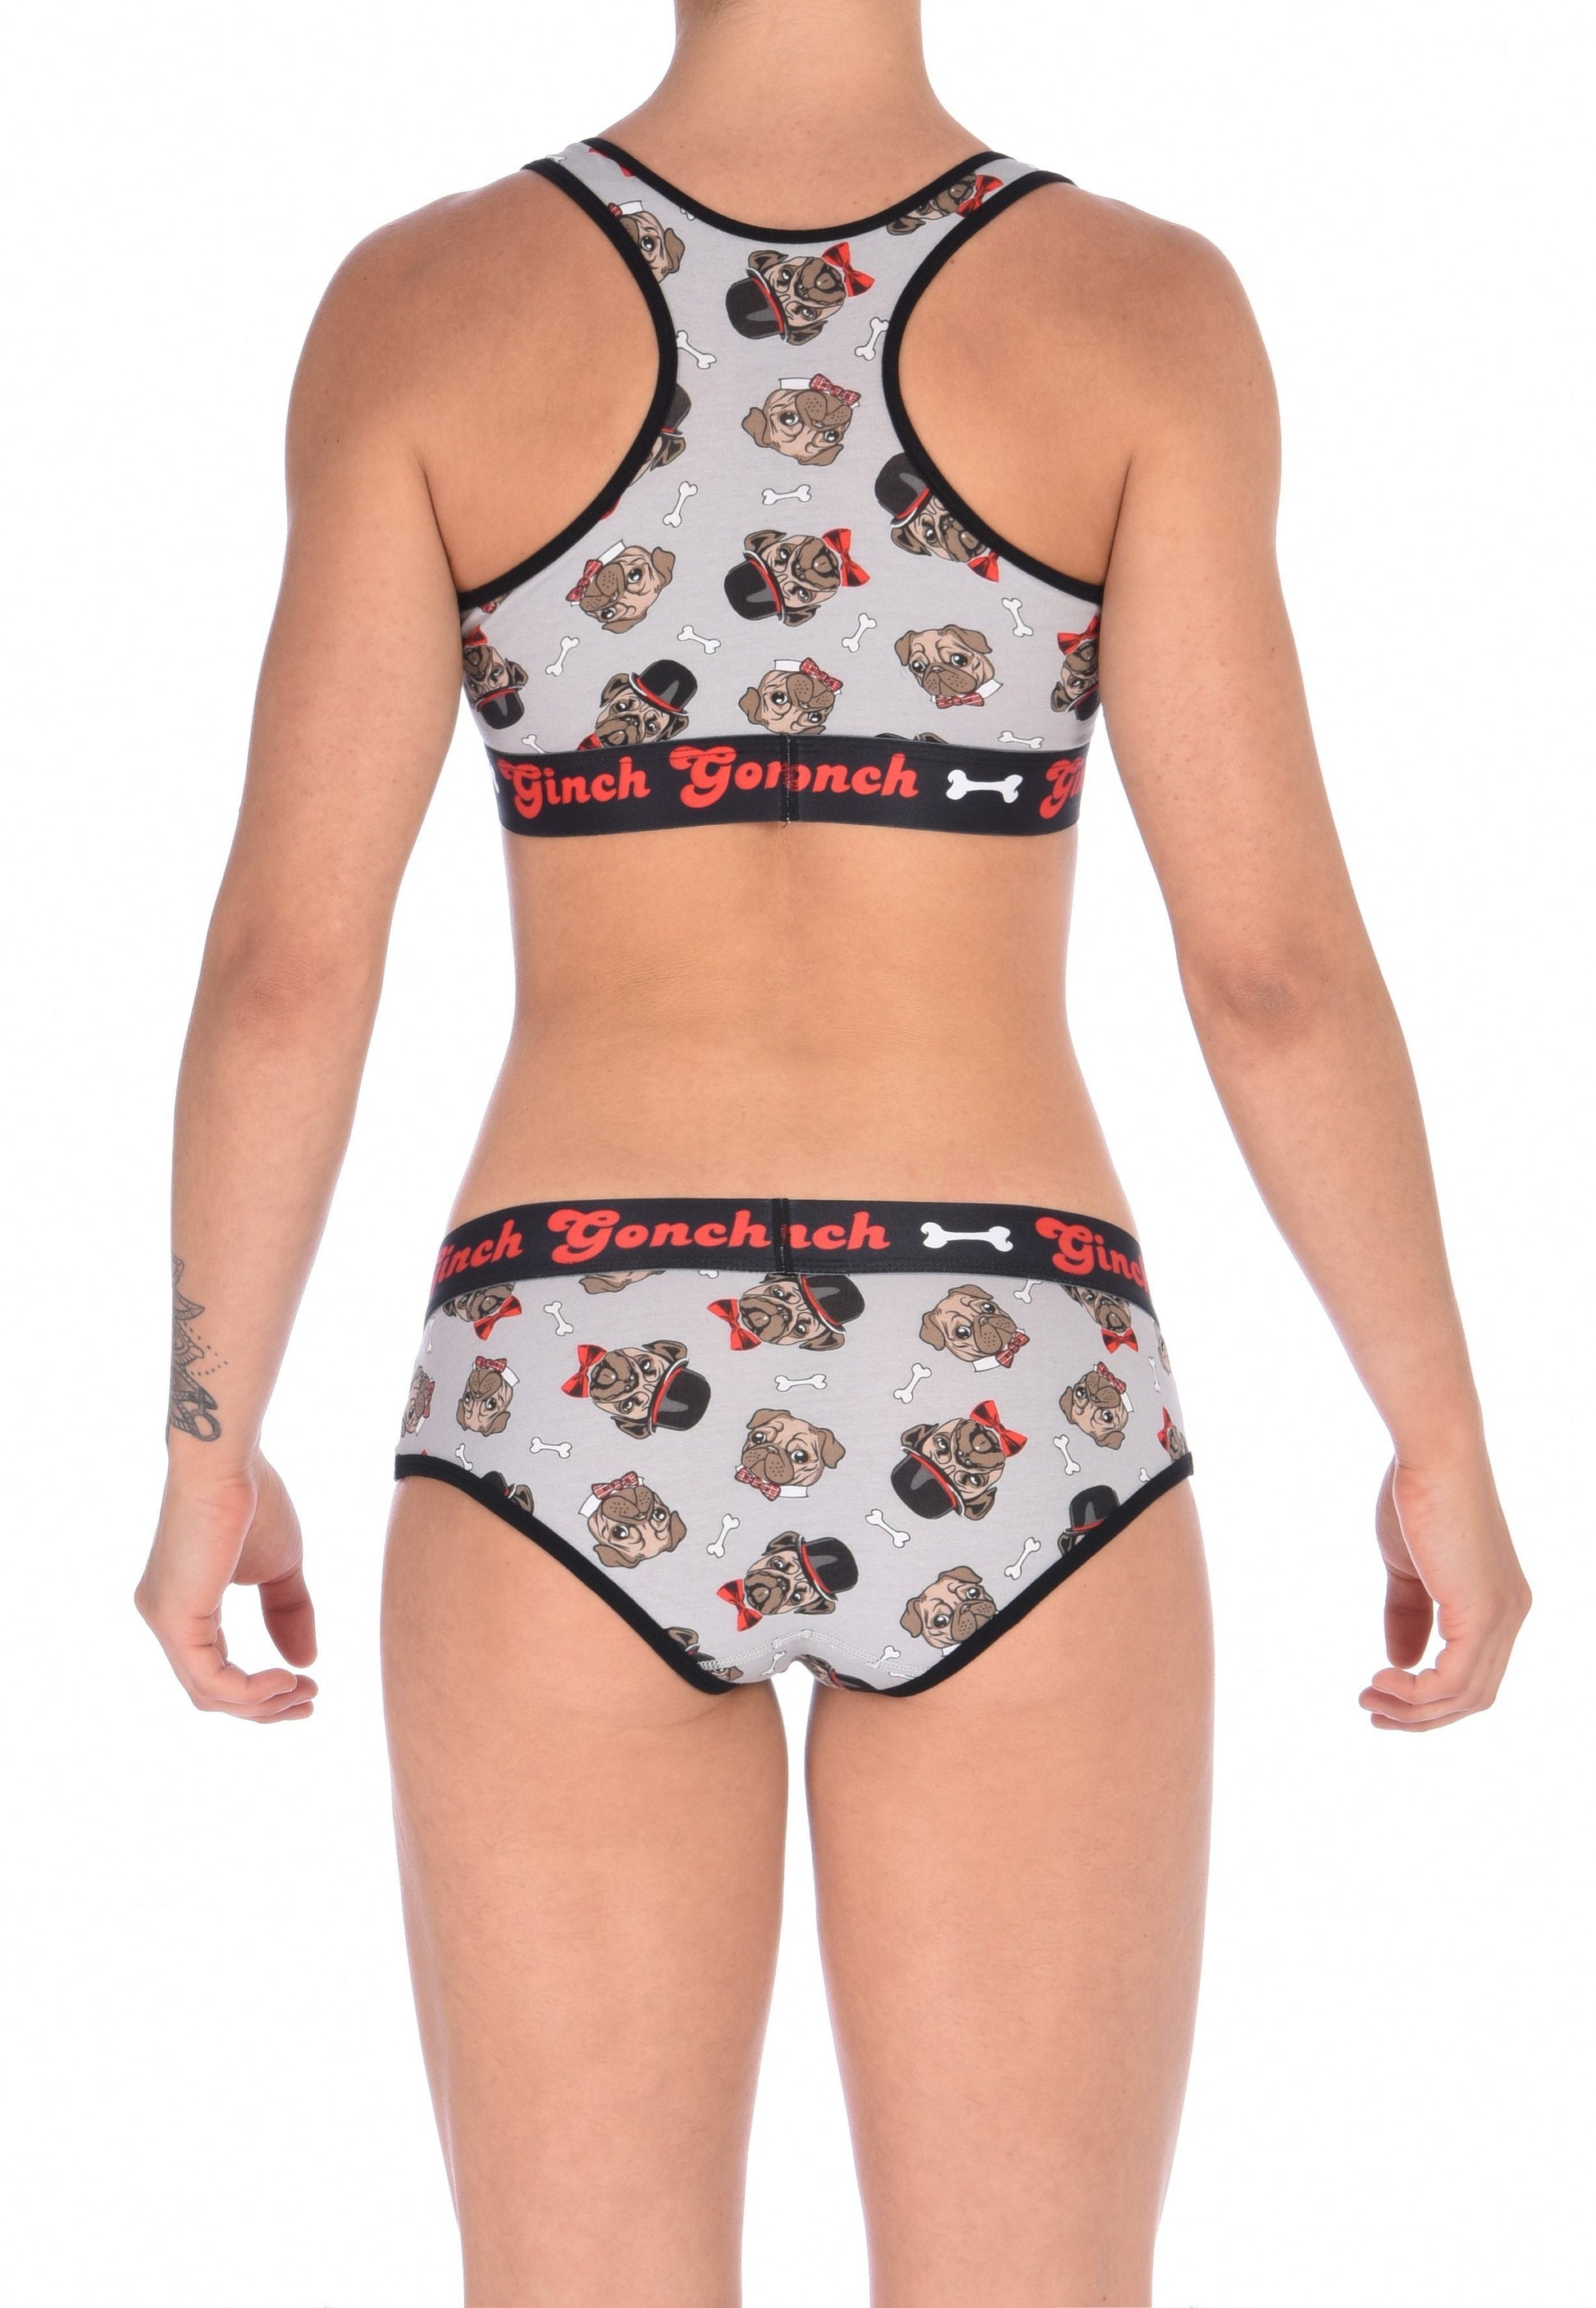 GG Ginch Gonch Pug Life boy cut brief y front - women's Underwear grey background with pugs with top hats and bow ties and bones. Black trim with black printed waistband back. Shown with matching sports bra